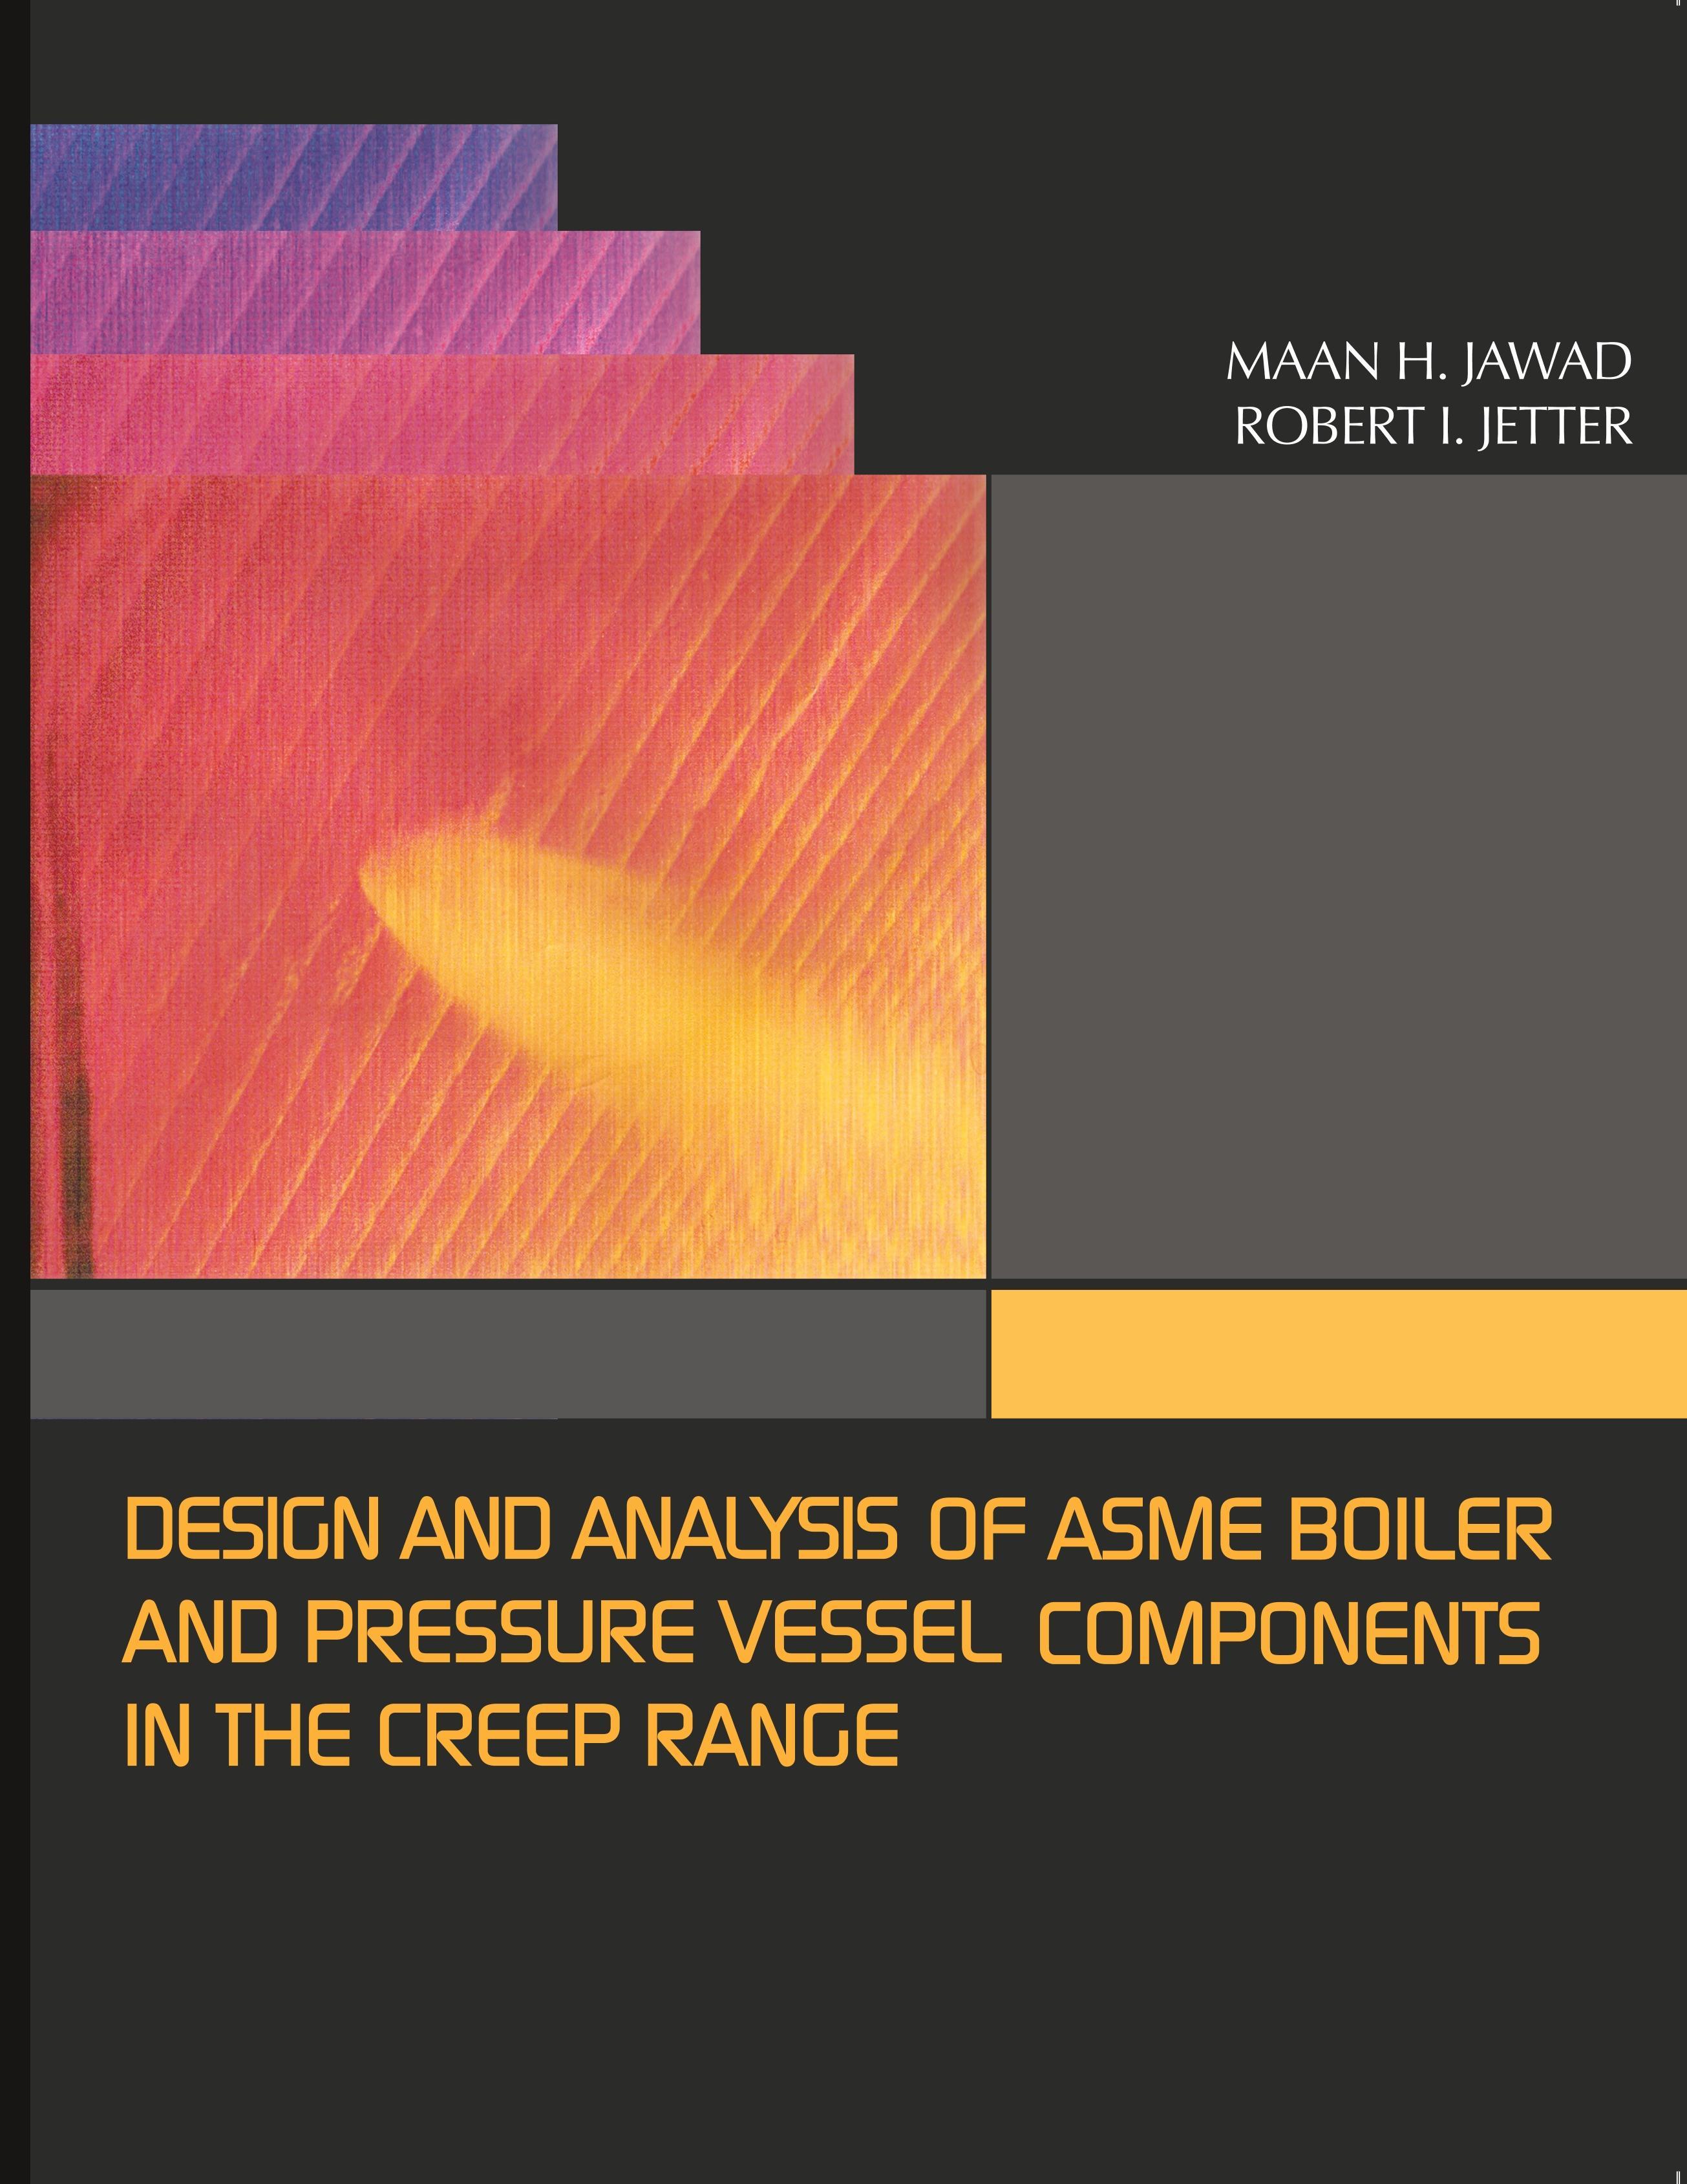 Design and Analysis of ASME Pressure Vessel Components in the Creep Range - Maan, Maan H. Jetter, Robert I